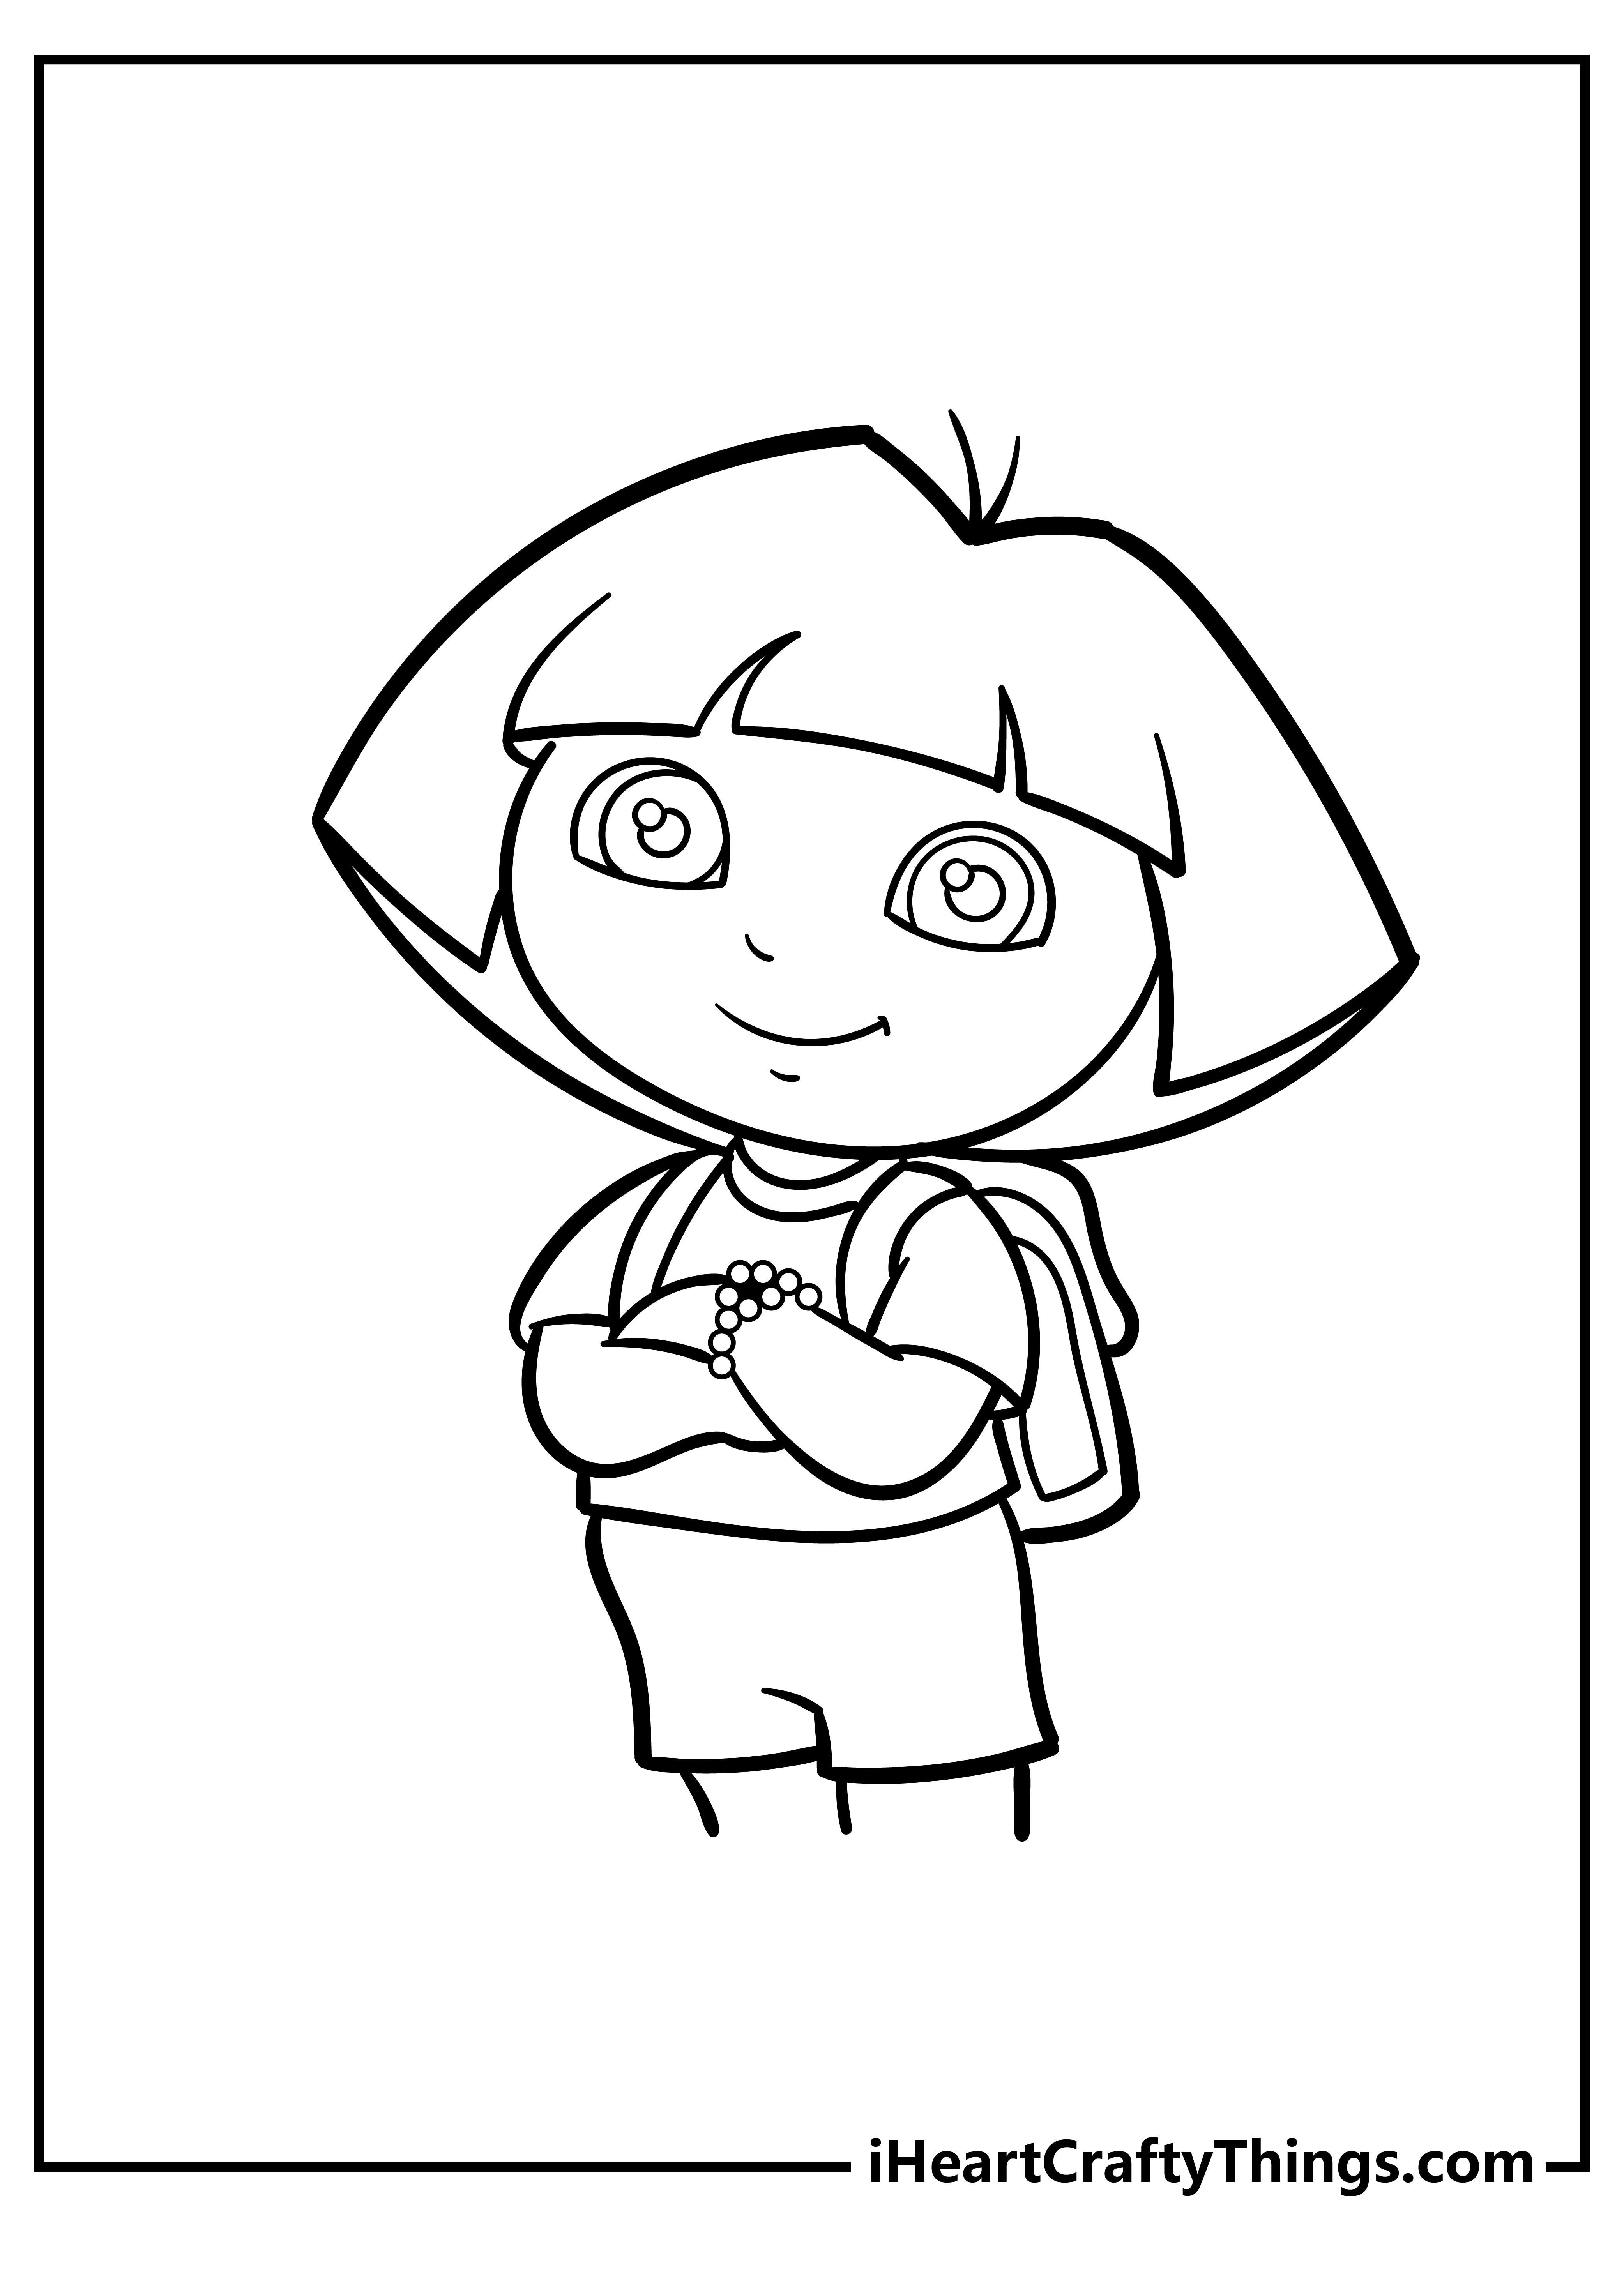 Dora Coloring Pages free pdf download